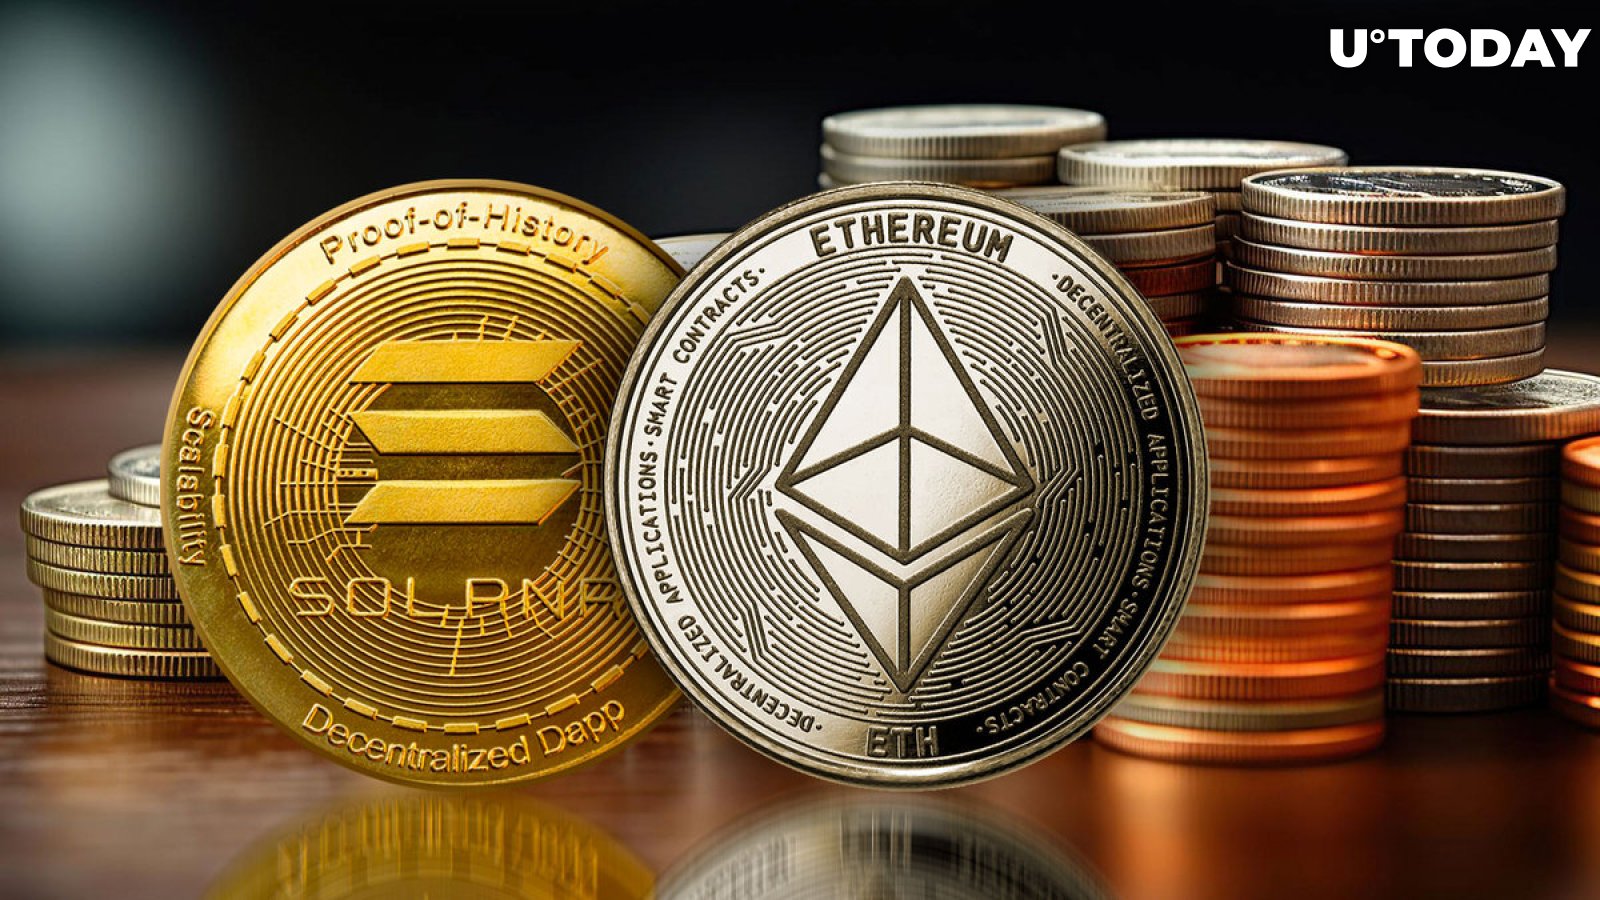 Solana or Ethereum L2s? Crypto Veteran 'Tired of These Takes'